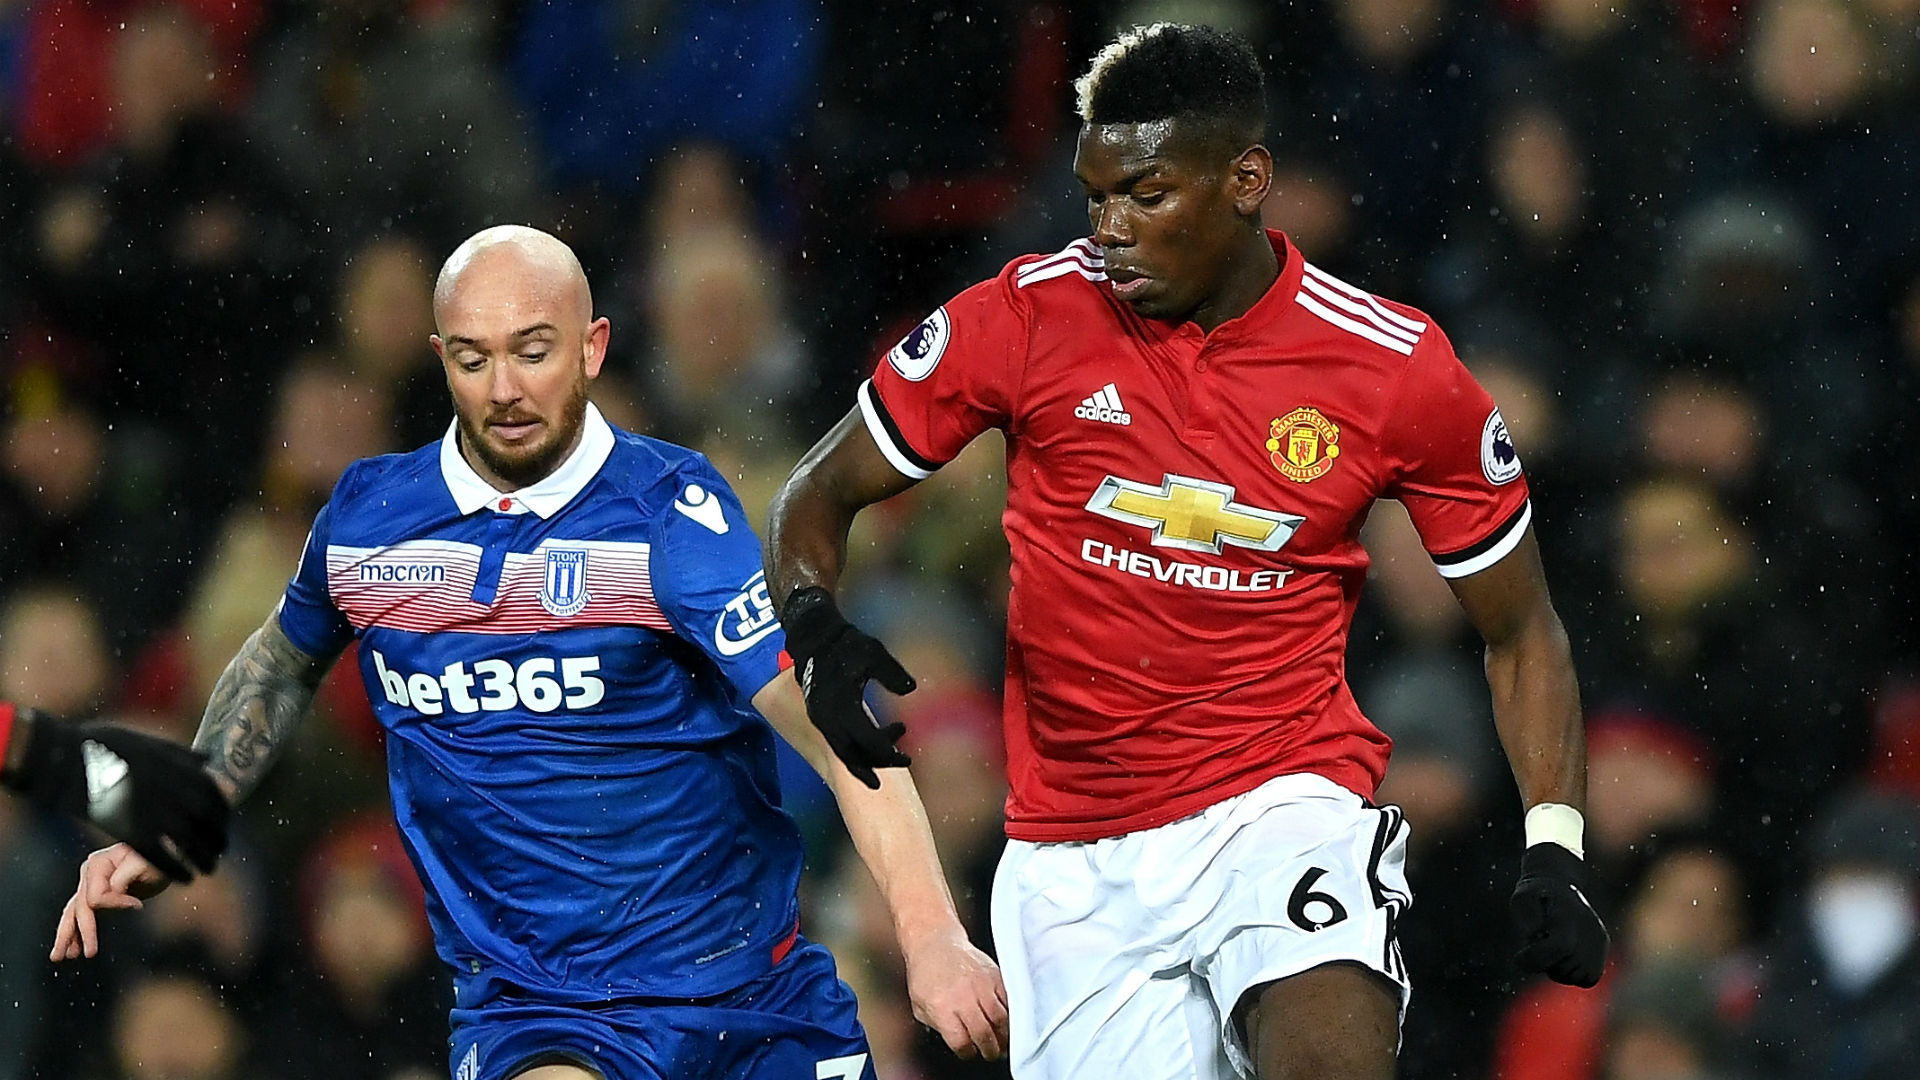 Assist King Paul Pogba Matches Kevin De Bruyne And Leroy Sane Despite Injury And Suspension